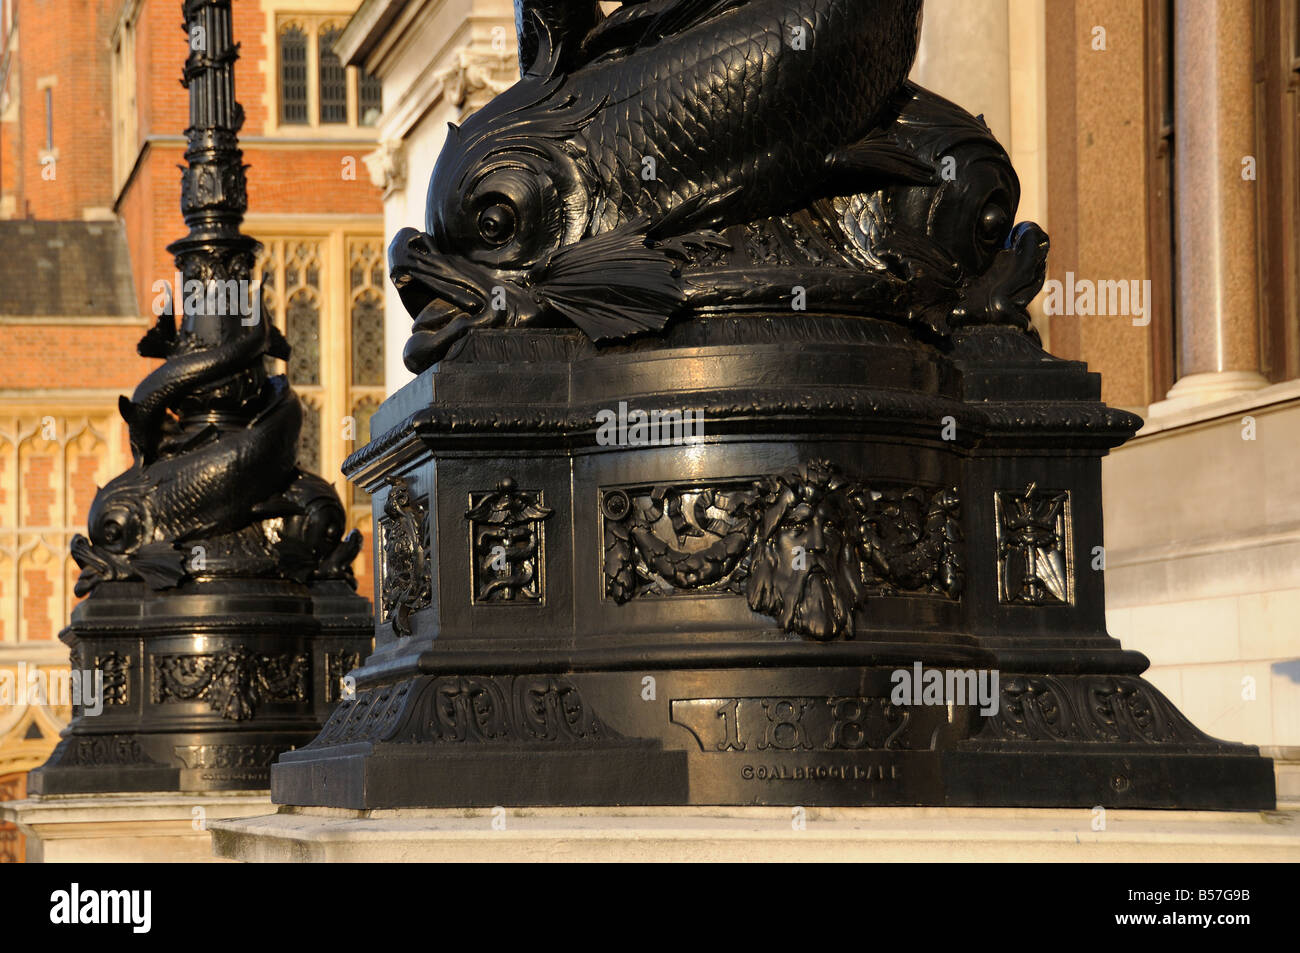 Lamps at the entrance to The City of London School, Victoria Embankment, London, UK Stock Photo